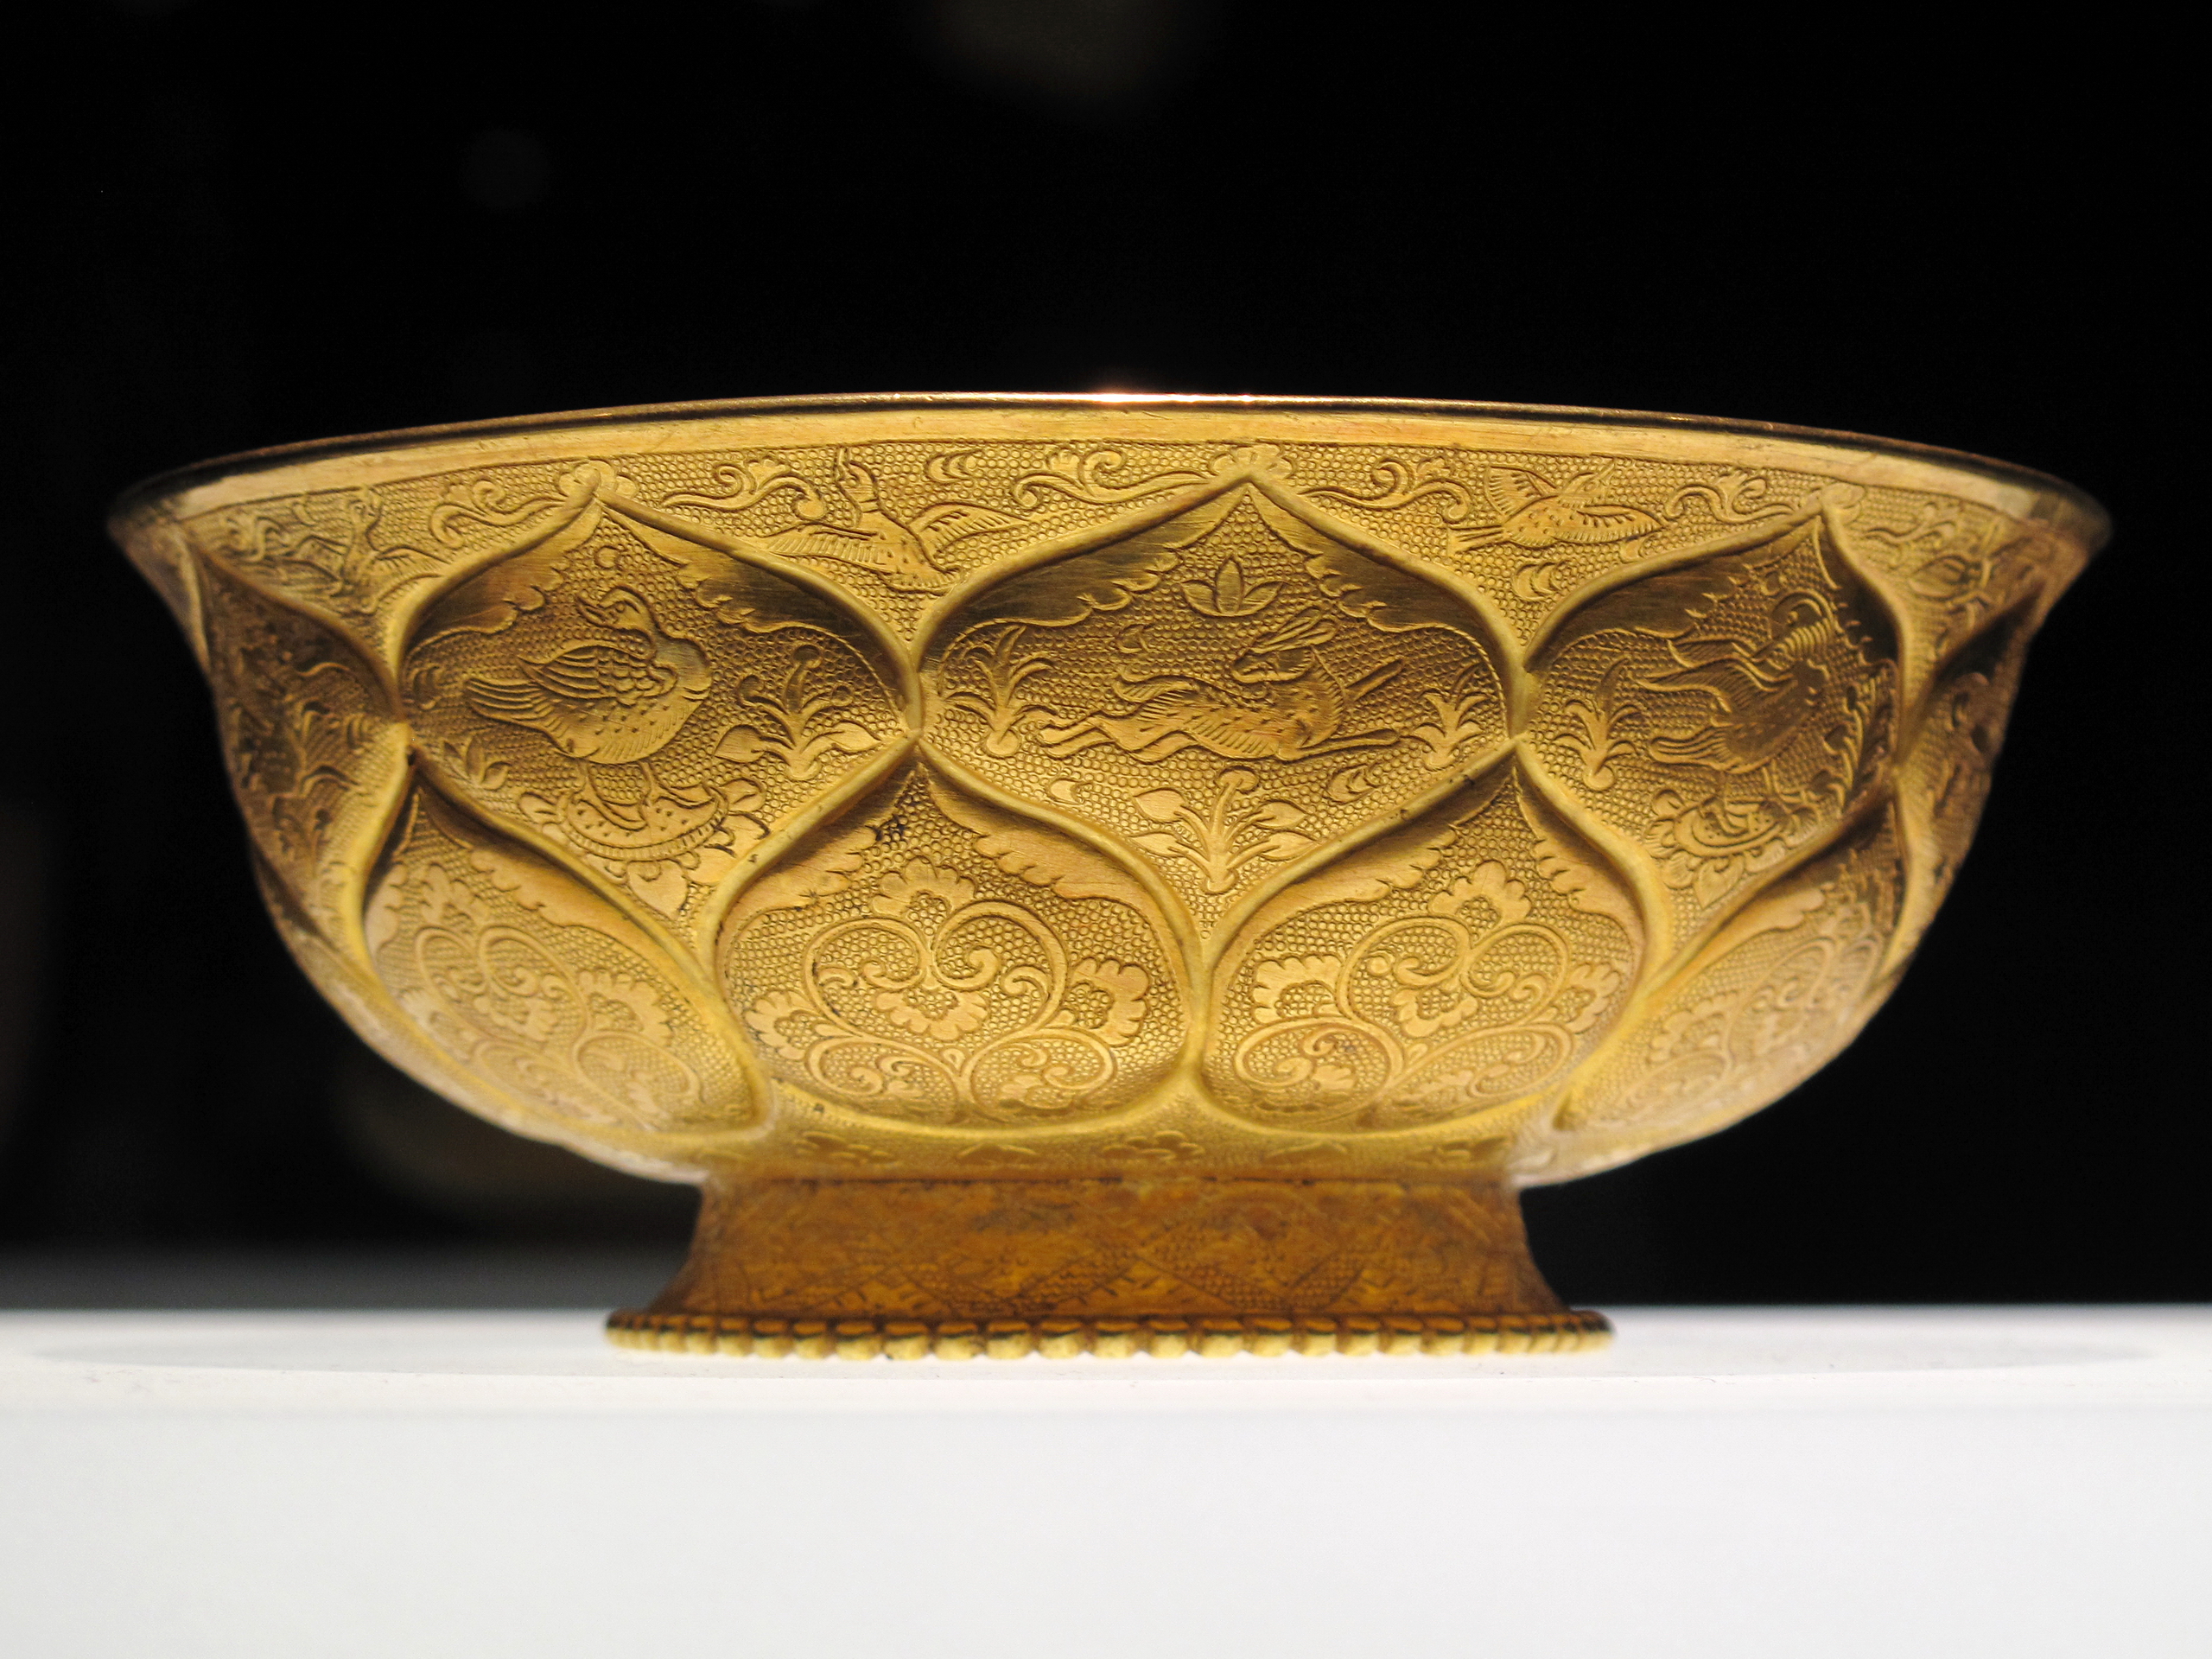 A golden bowl with decorative patterns and animals engraved along the side.